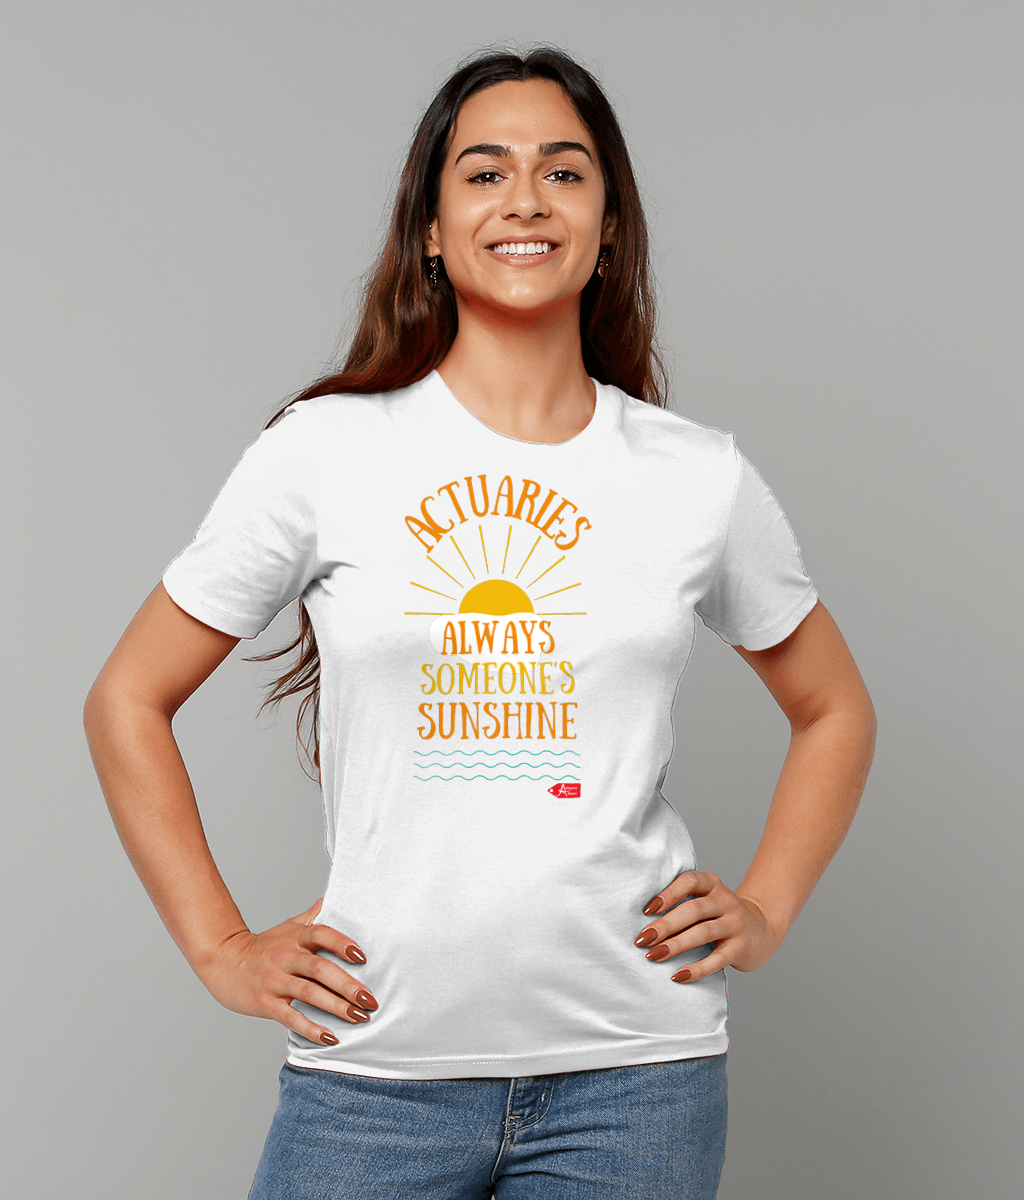 Actuaries Always Someone's Sunshine T-Shirt (Black and White Variants)